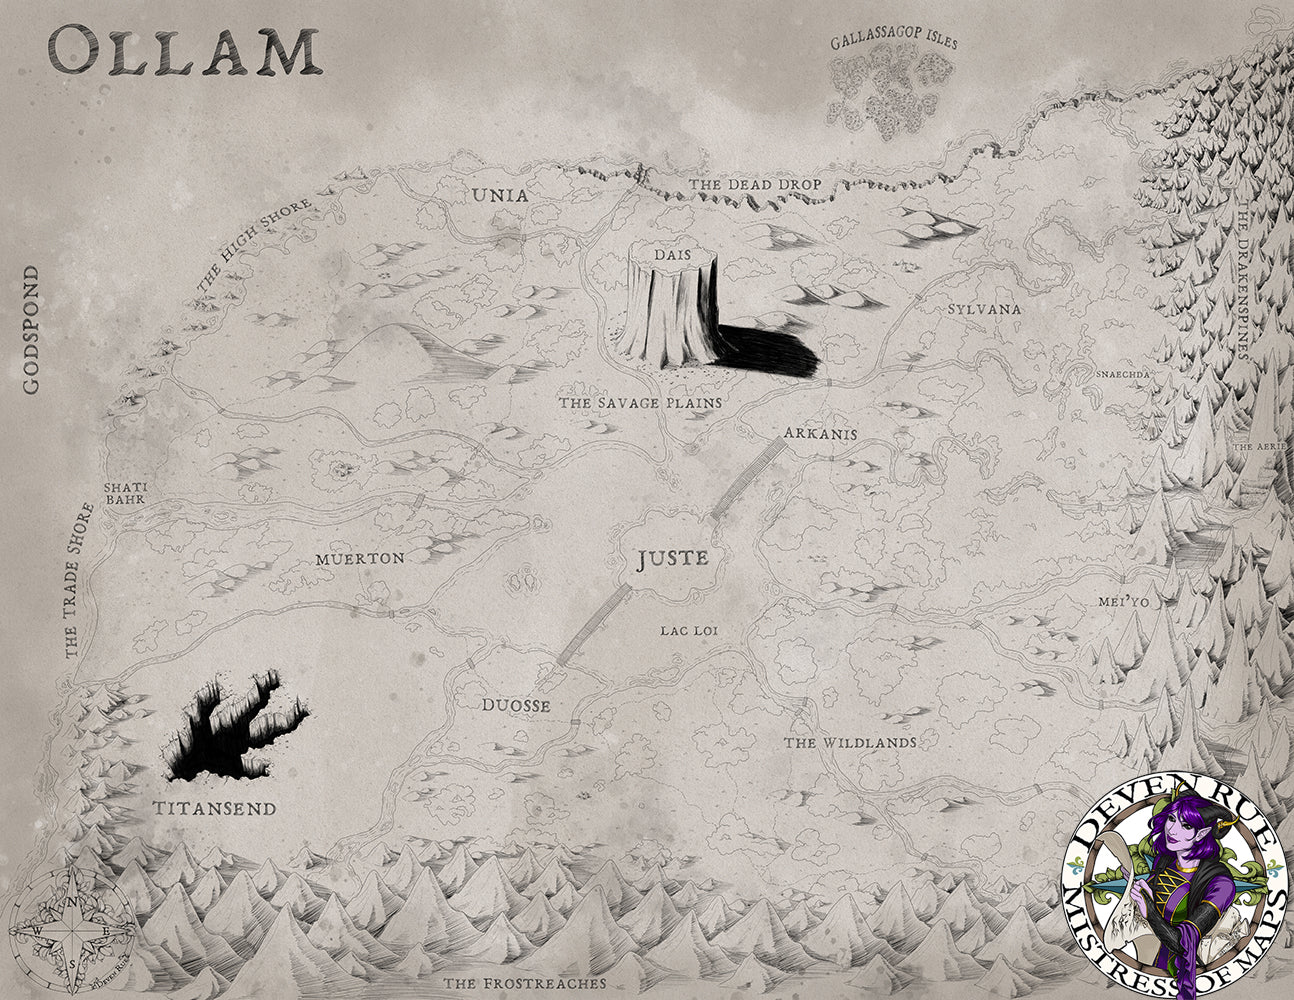 A map illustration of a fantasy place called Ollam with high mountains on two sides and a shore on two others.